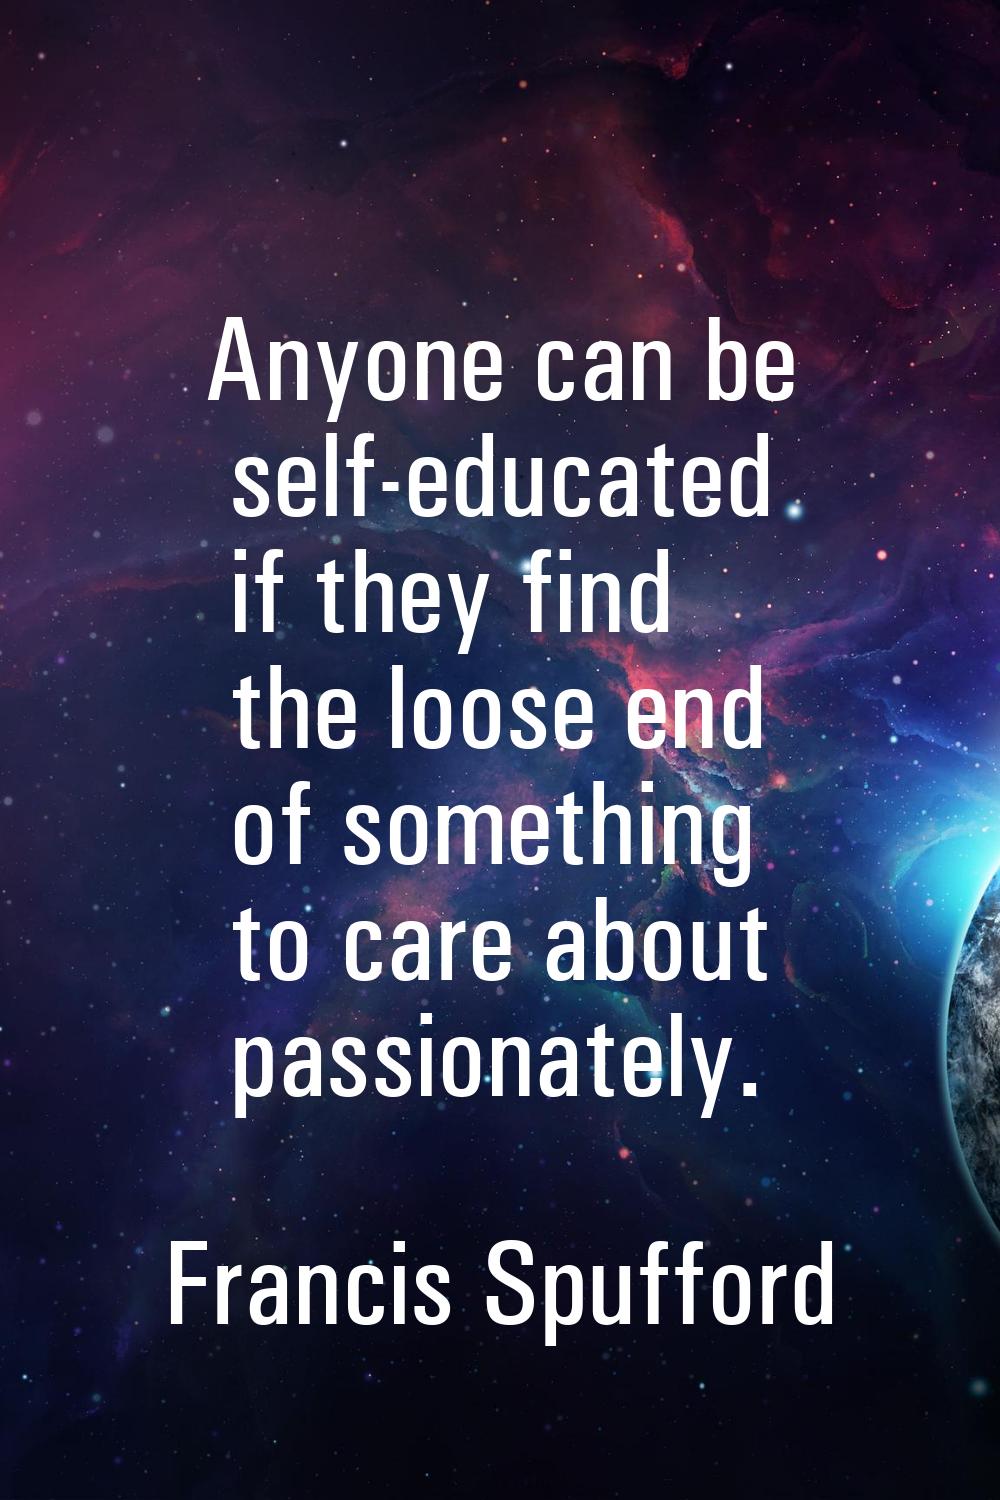 Anyone can be self-educated if they find the loose end of something to care about passionately.